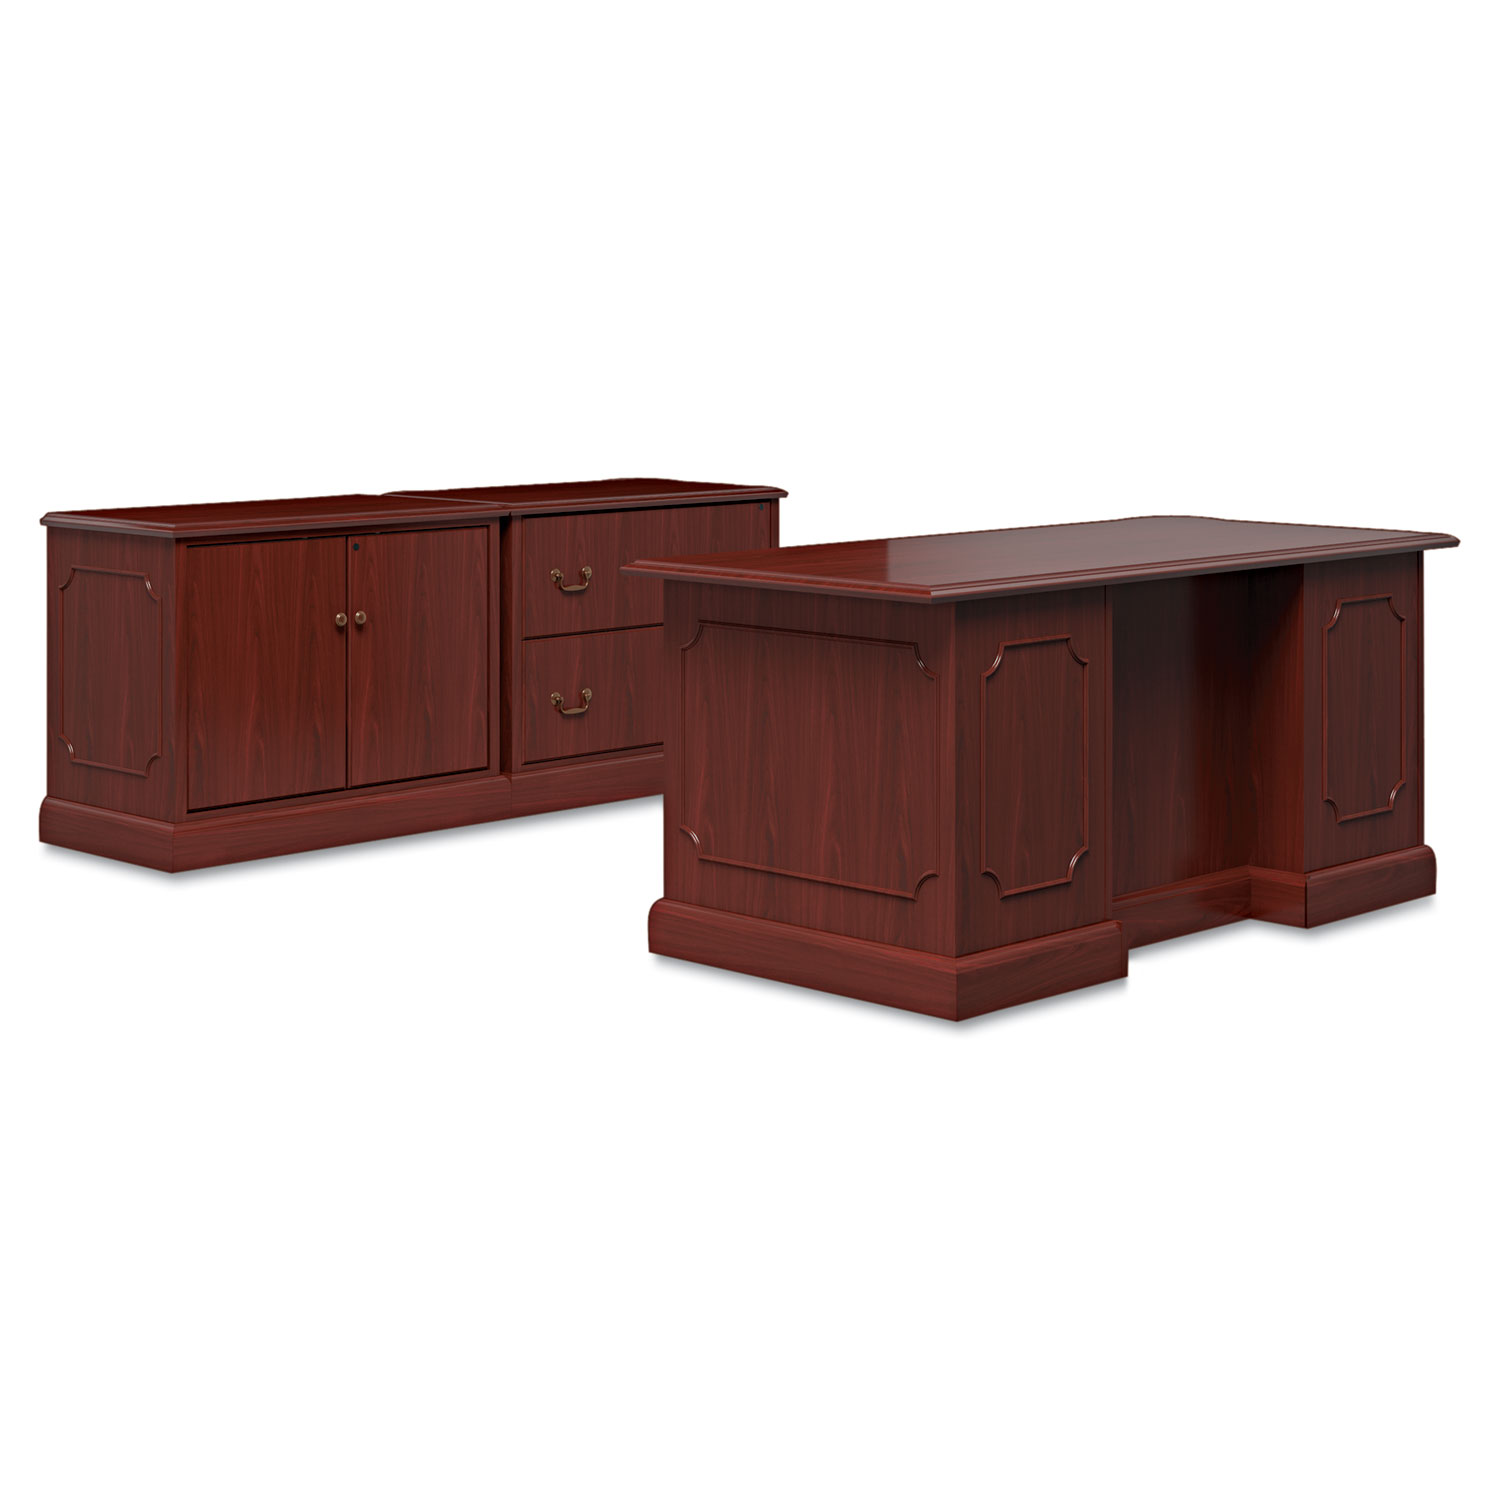 94000 Series Two-Drawer Lateral File, 37-1/2w x 20-1/2d x 29-1/2h, Mahogany